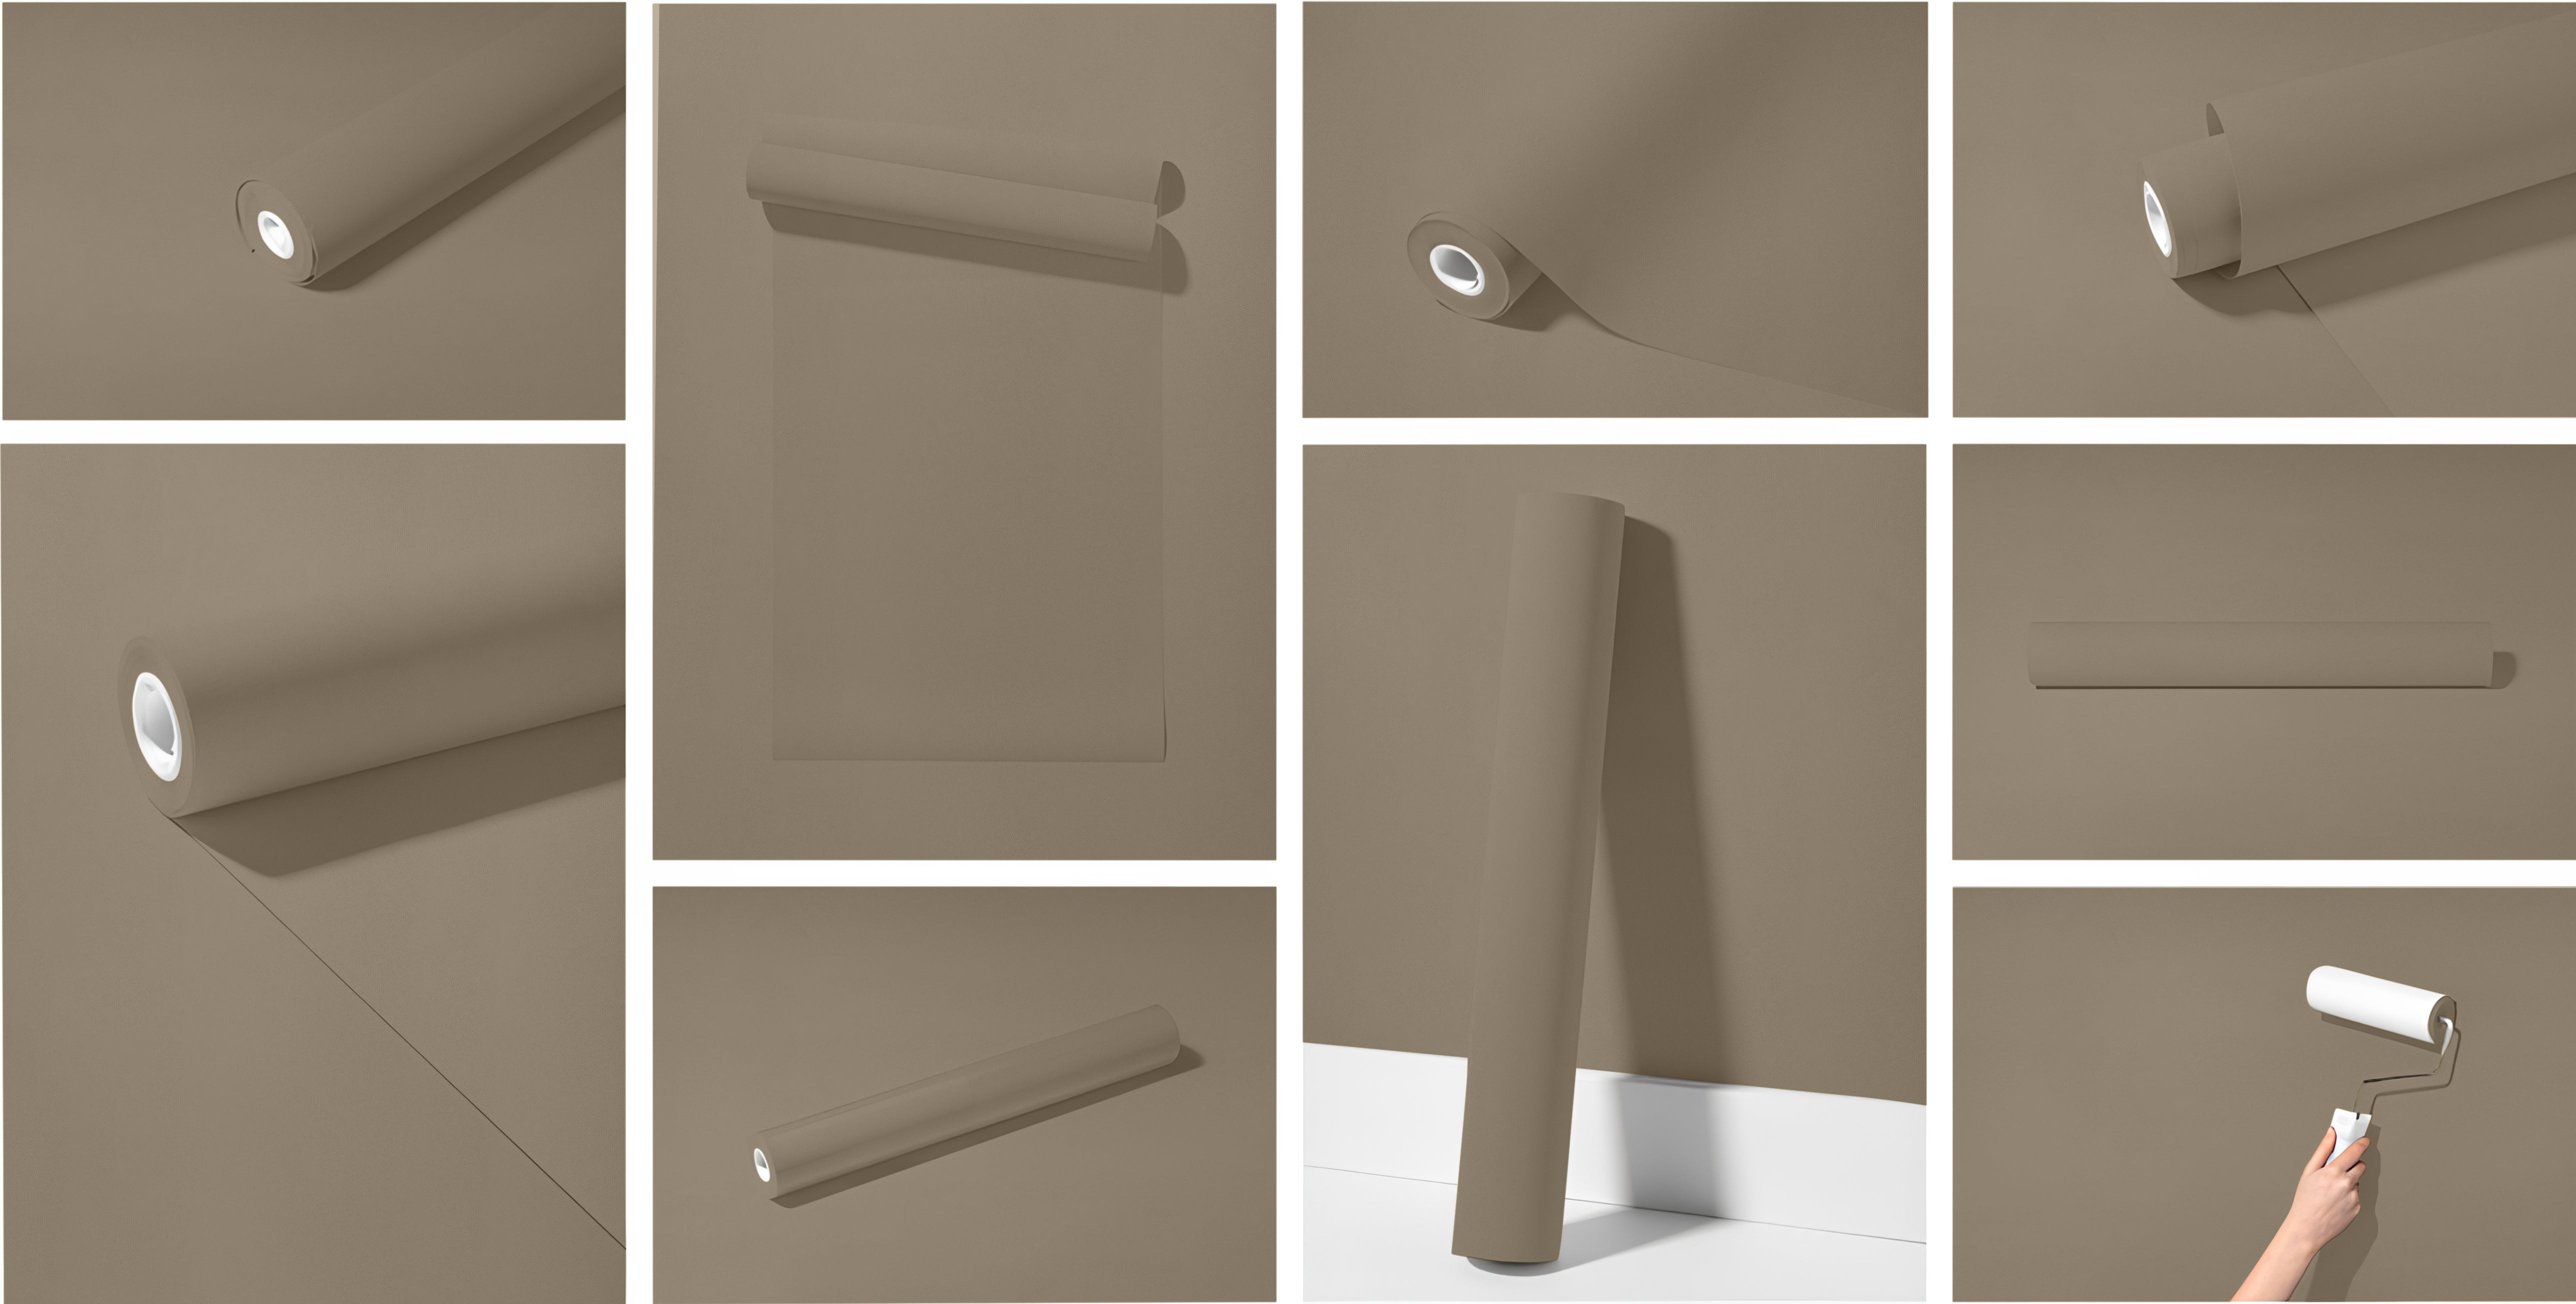 Peel & Stick Removable Re-usable Paint - Color RAL 1035 Pearl Beige - offRAL™ - RALRAW LLC, USA